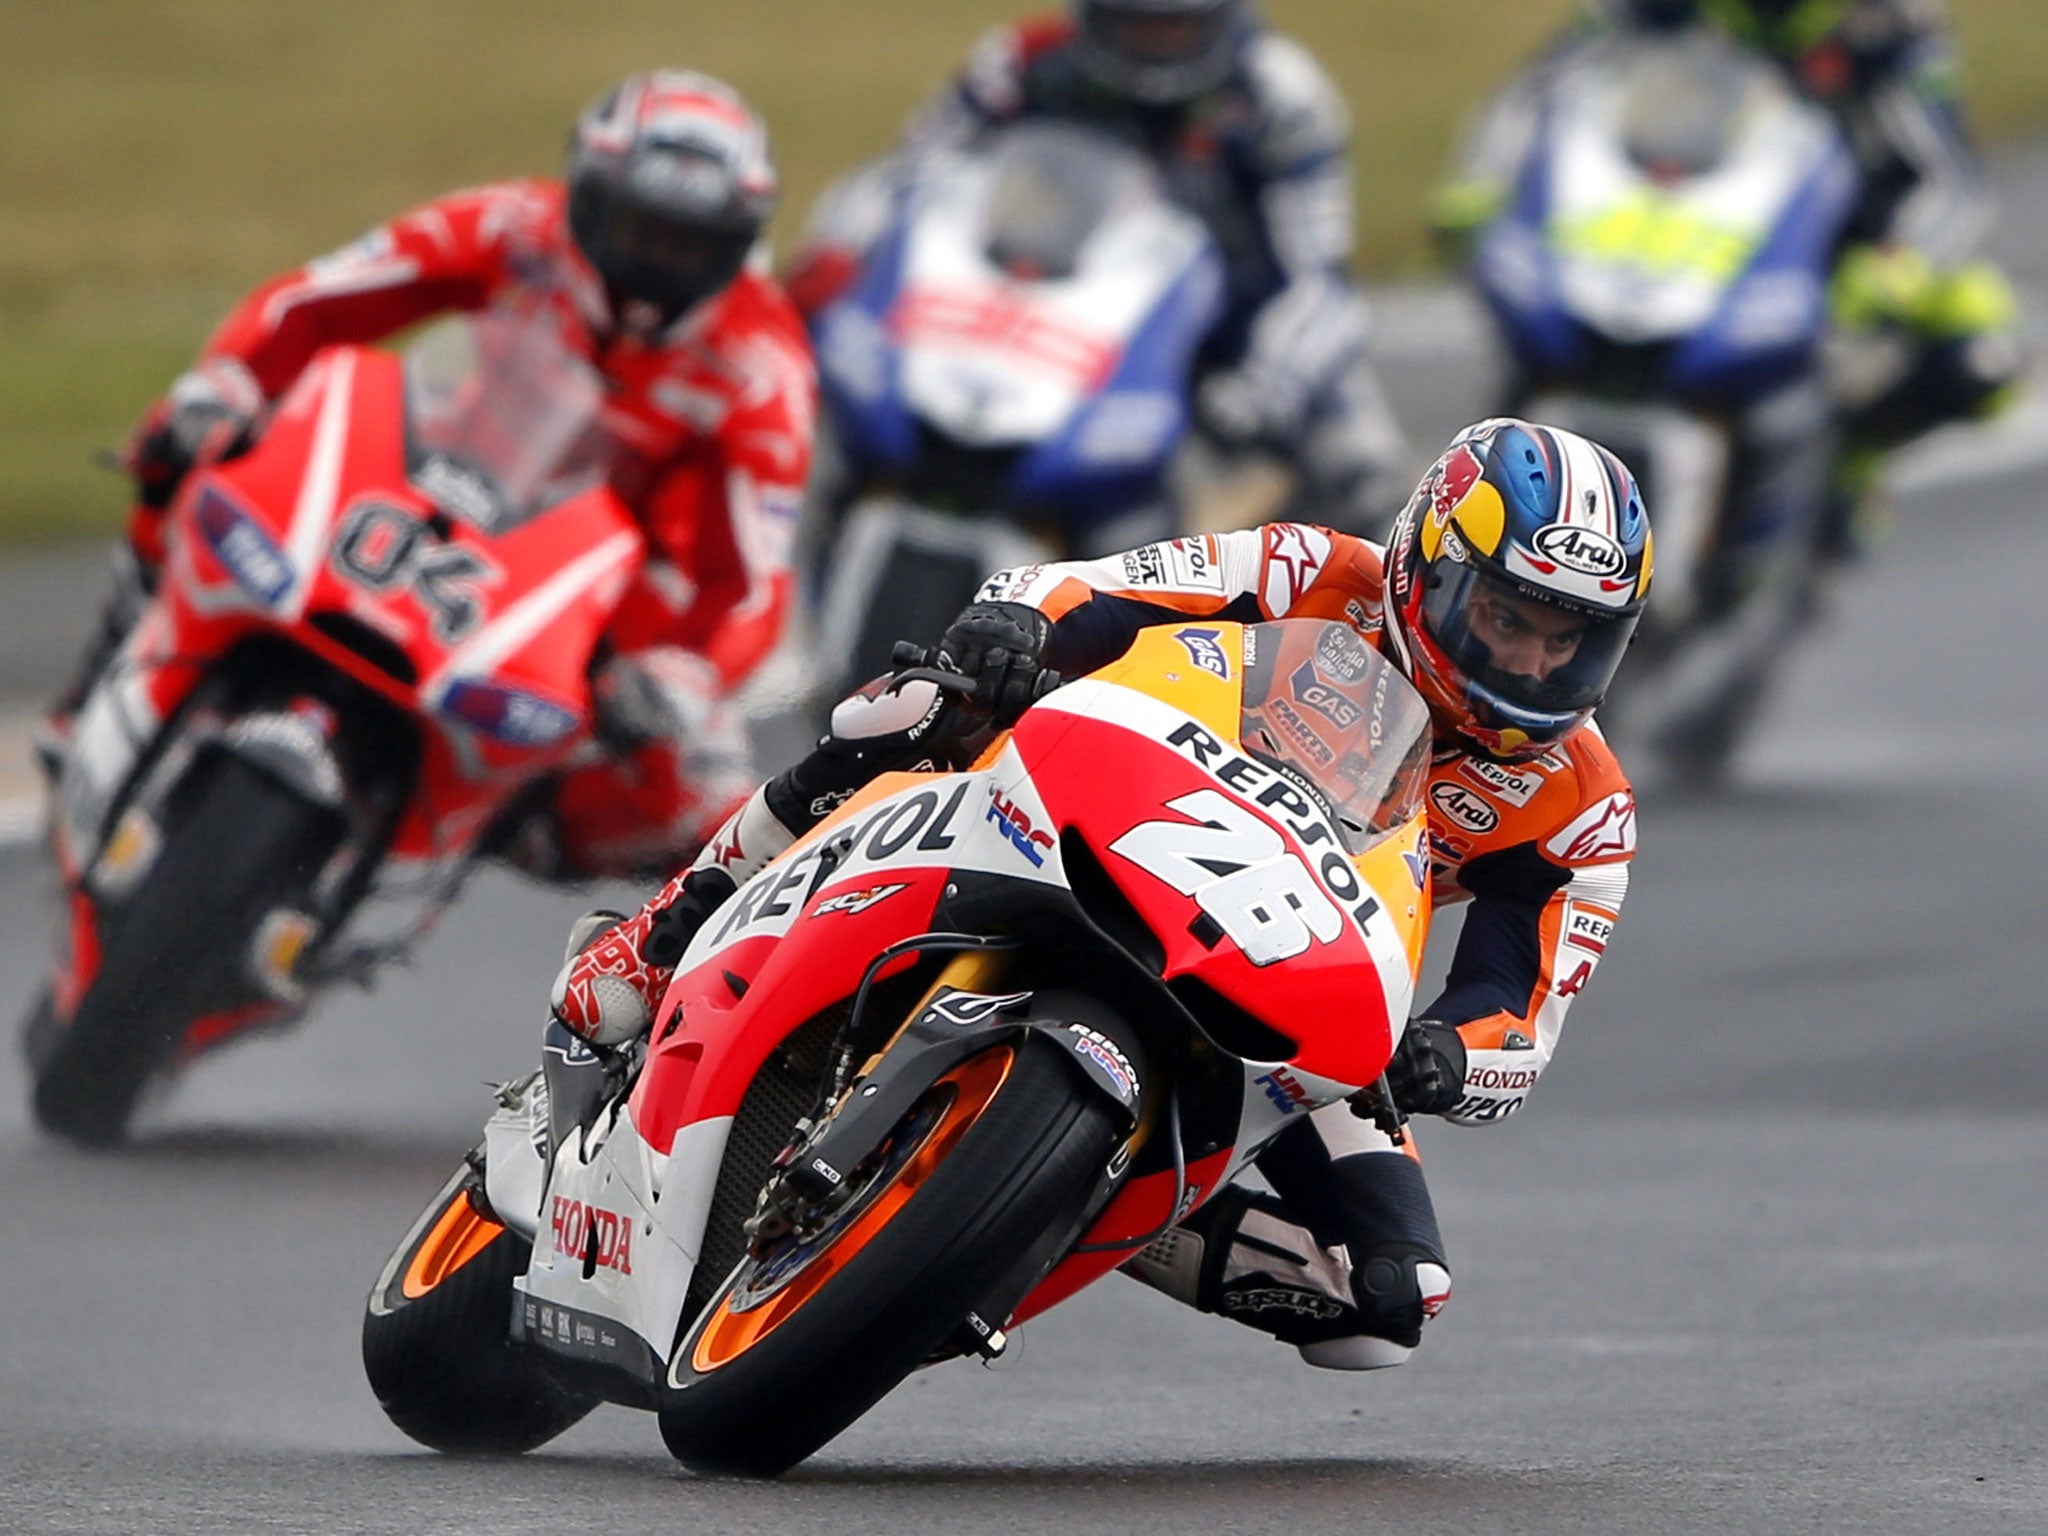 Dani Pedrosa on his way to victory in the French Grand Prix